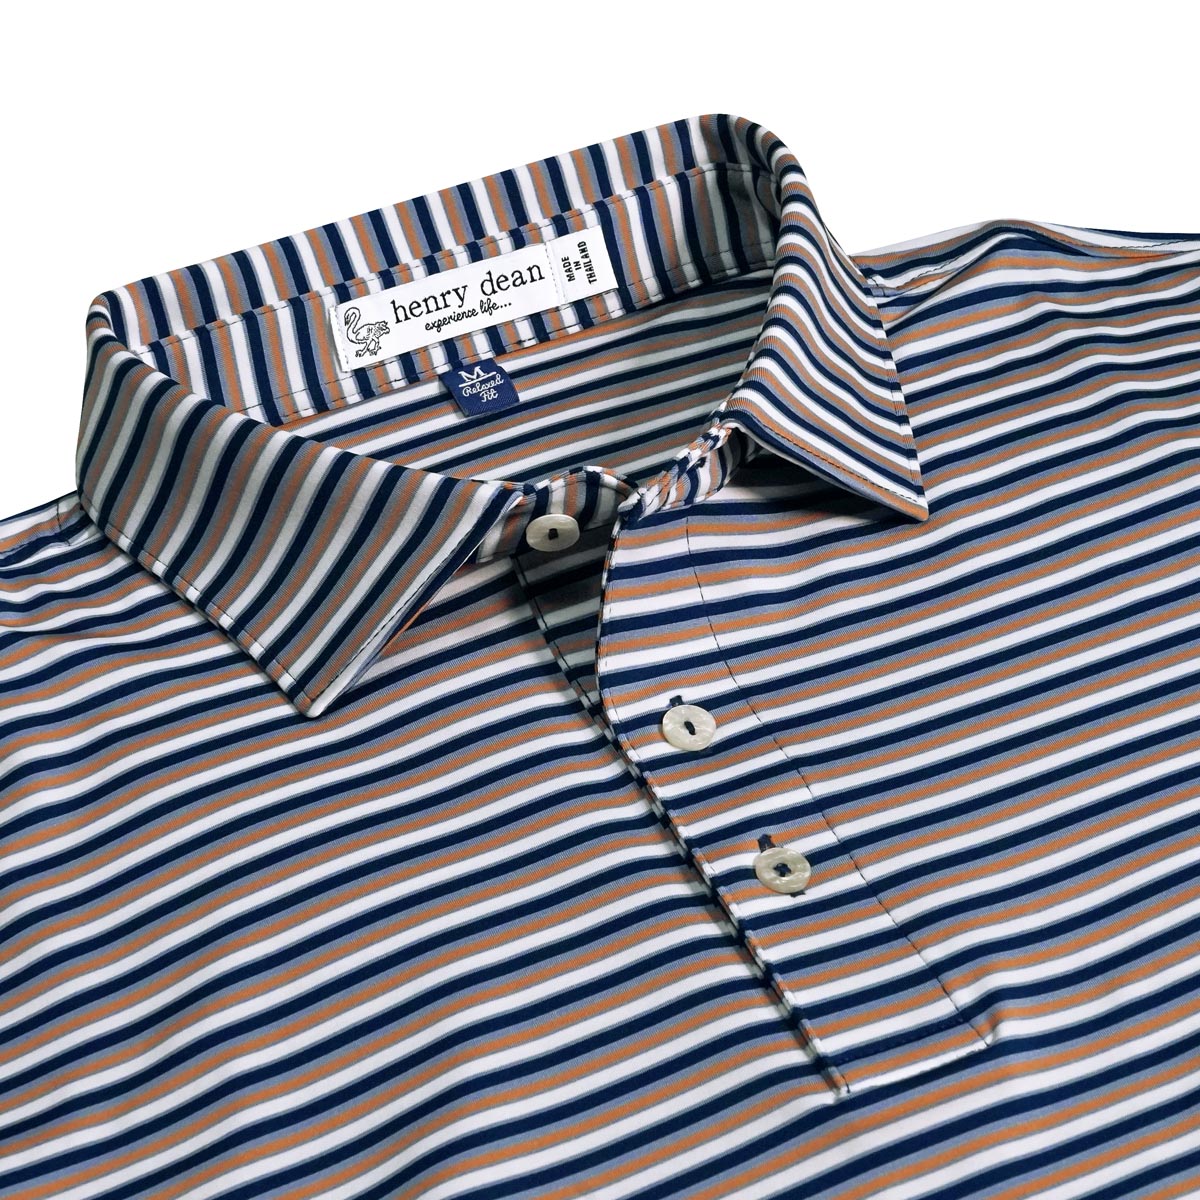 henry dean Four-Color Stripe Performance Knit Golf Shirts - Relaxed Fit